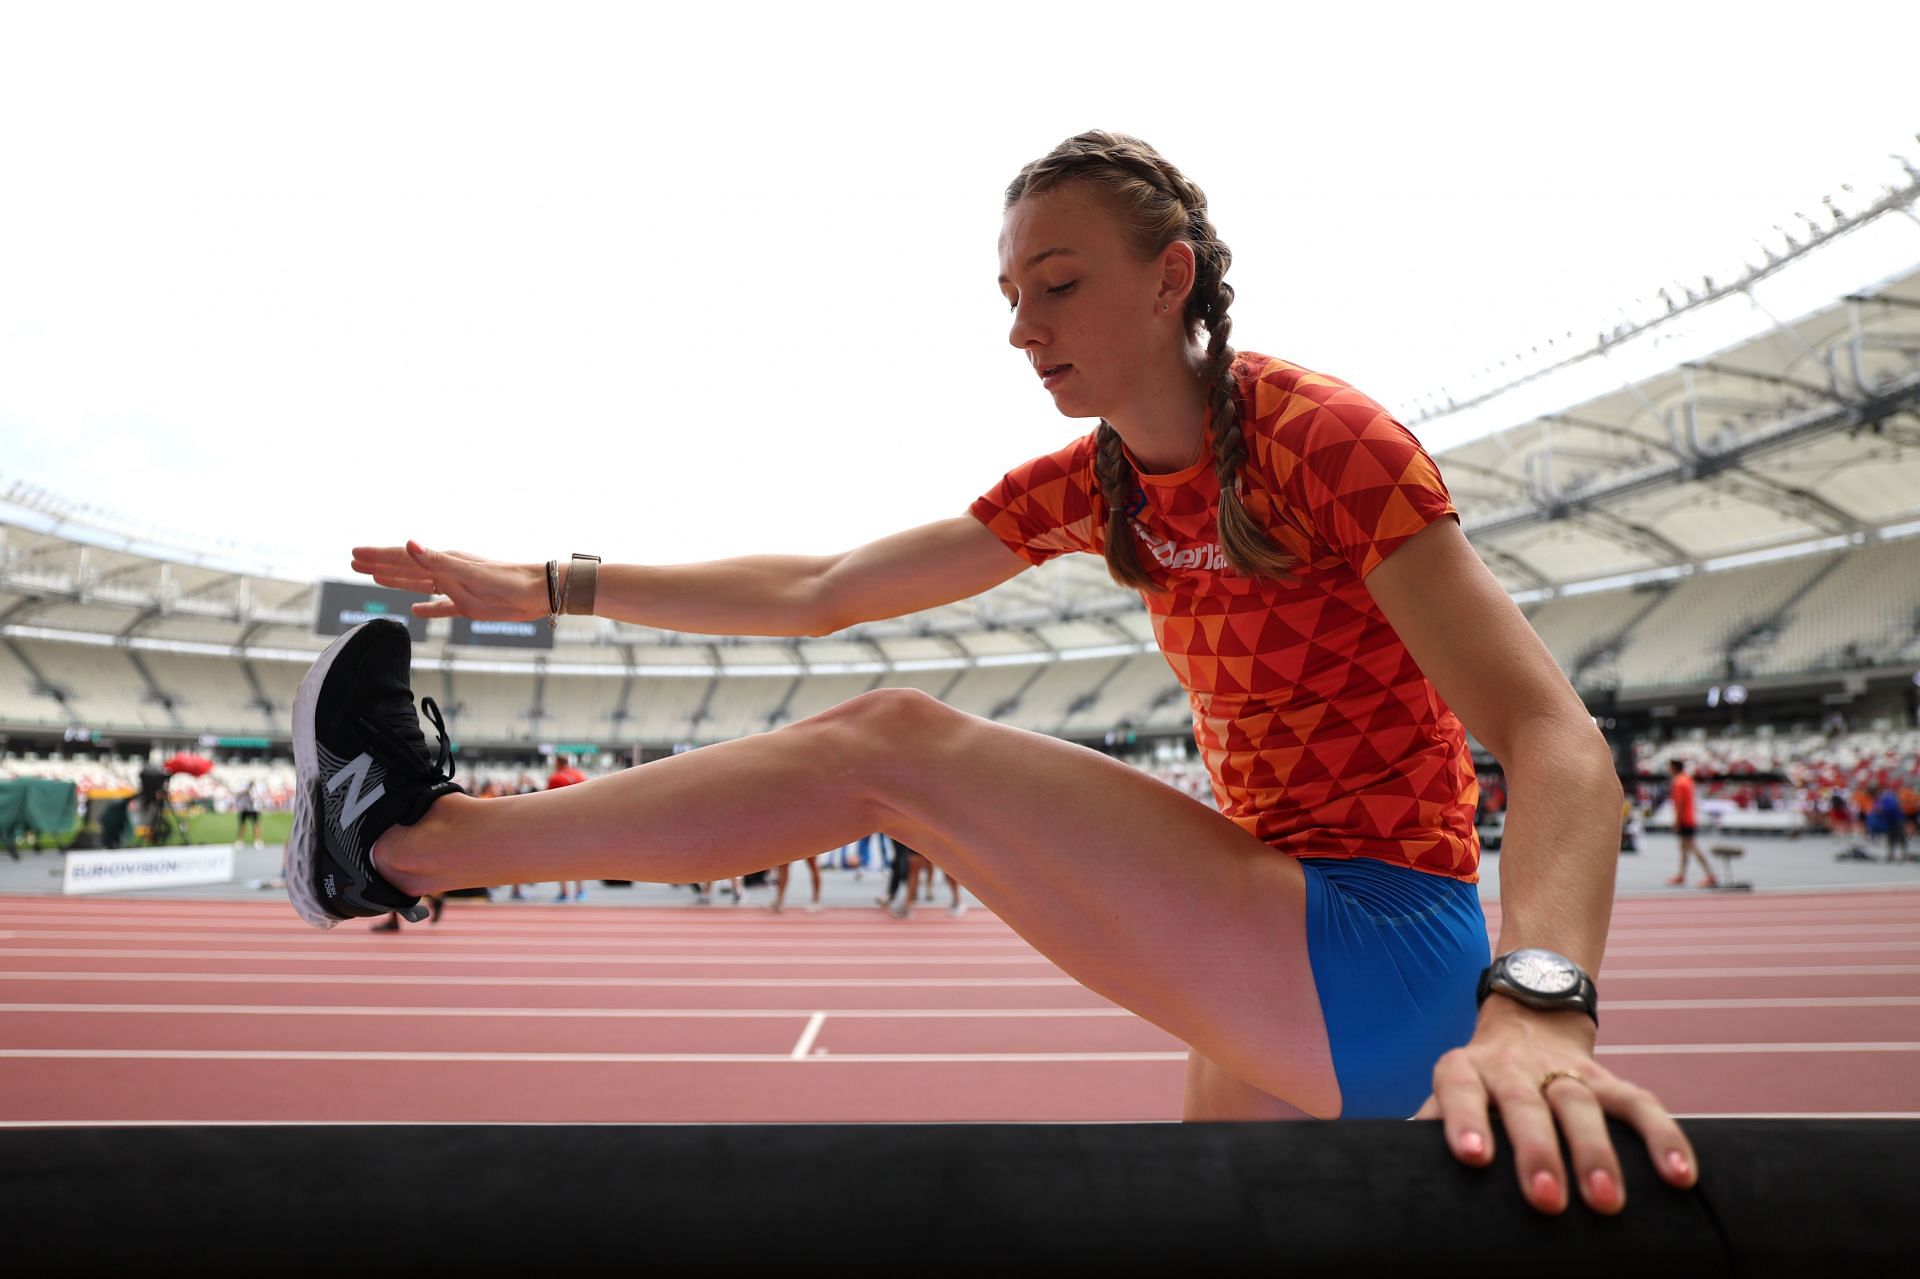 Femke Bol warms up during the training session ahead of the 2023 World Athletics Championships in Budapest, Hungary